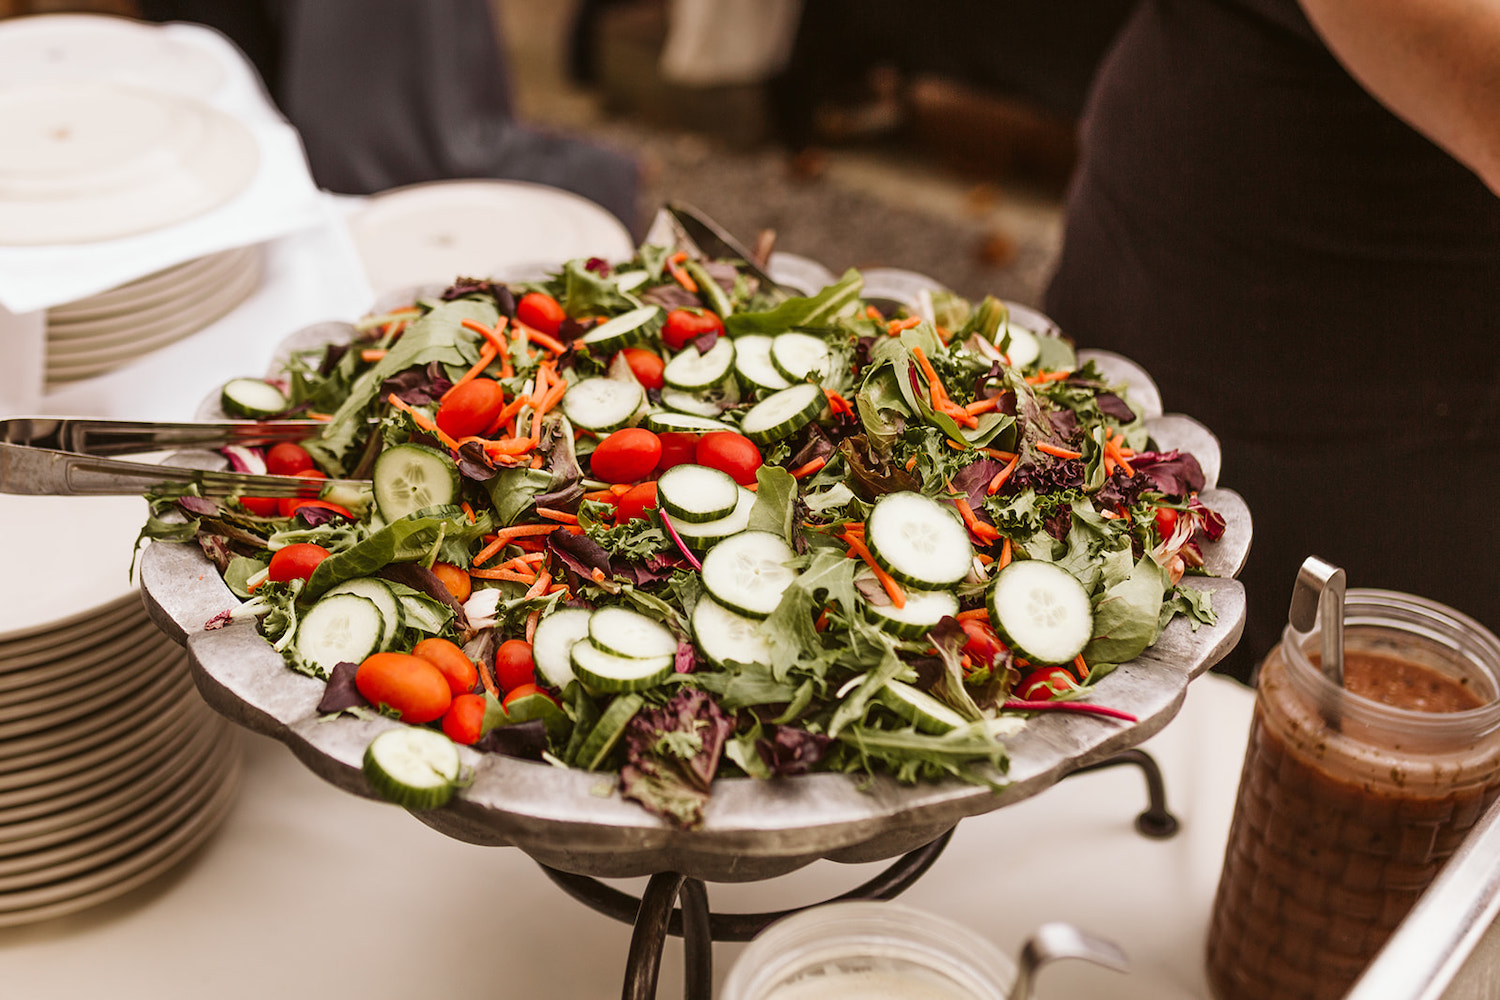 large, green salad with mixed vegetables in a serving bowl